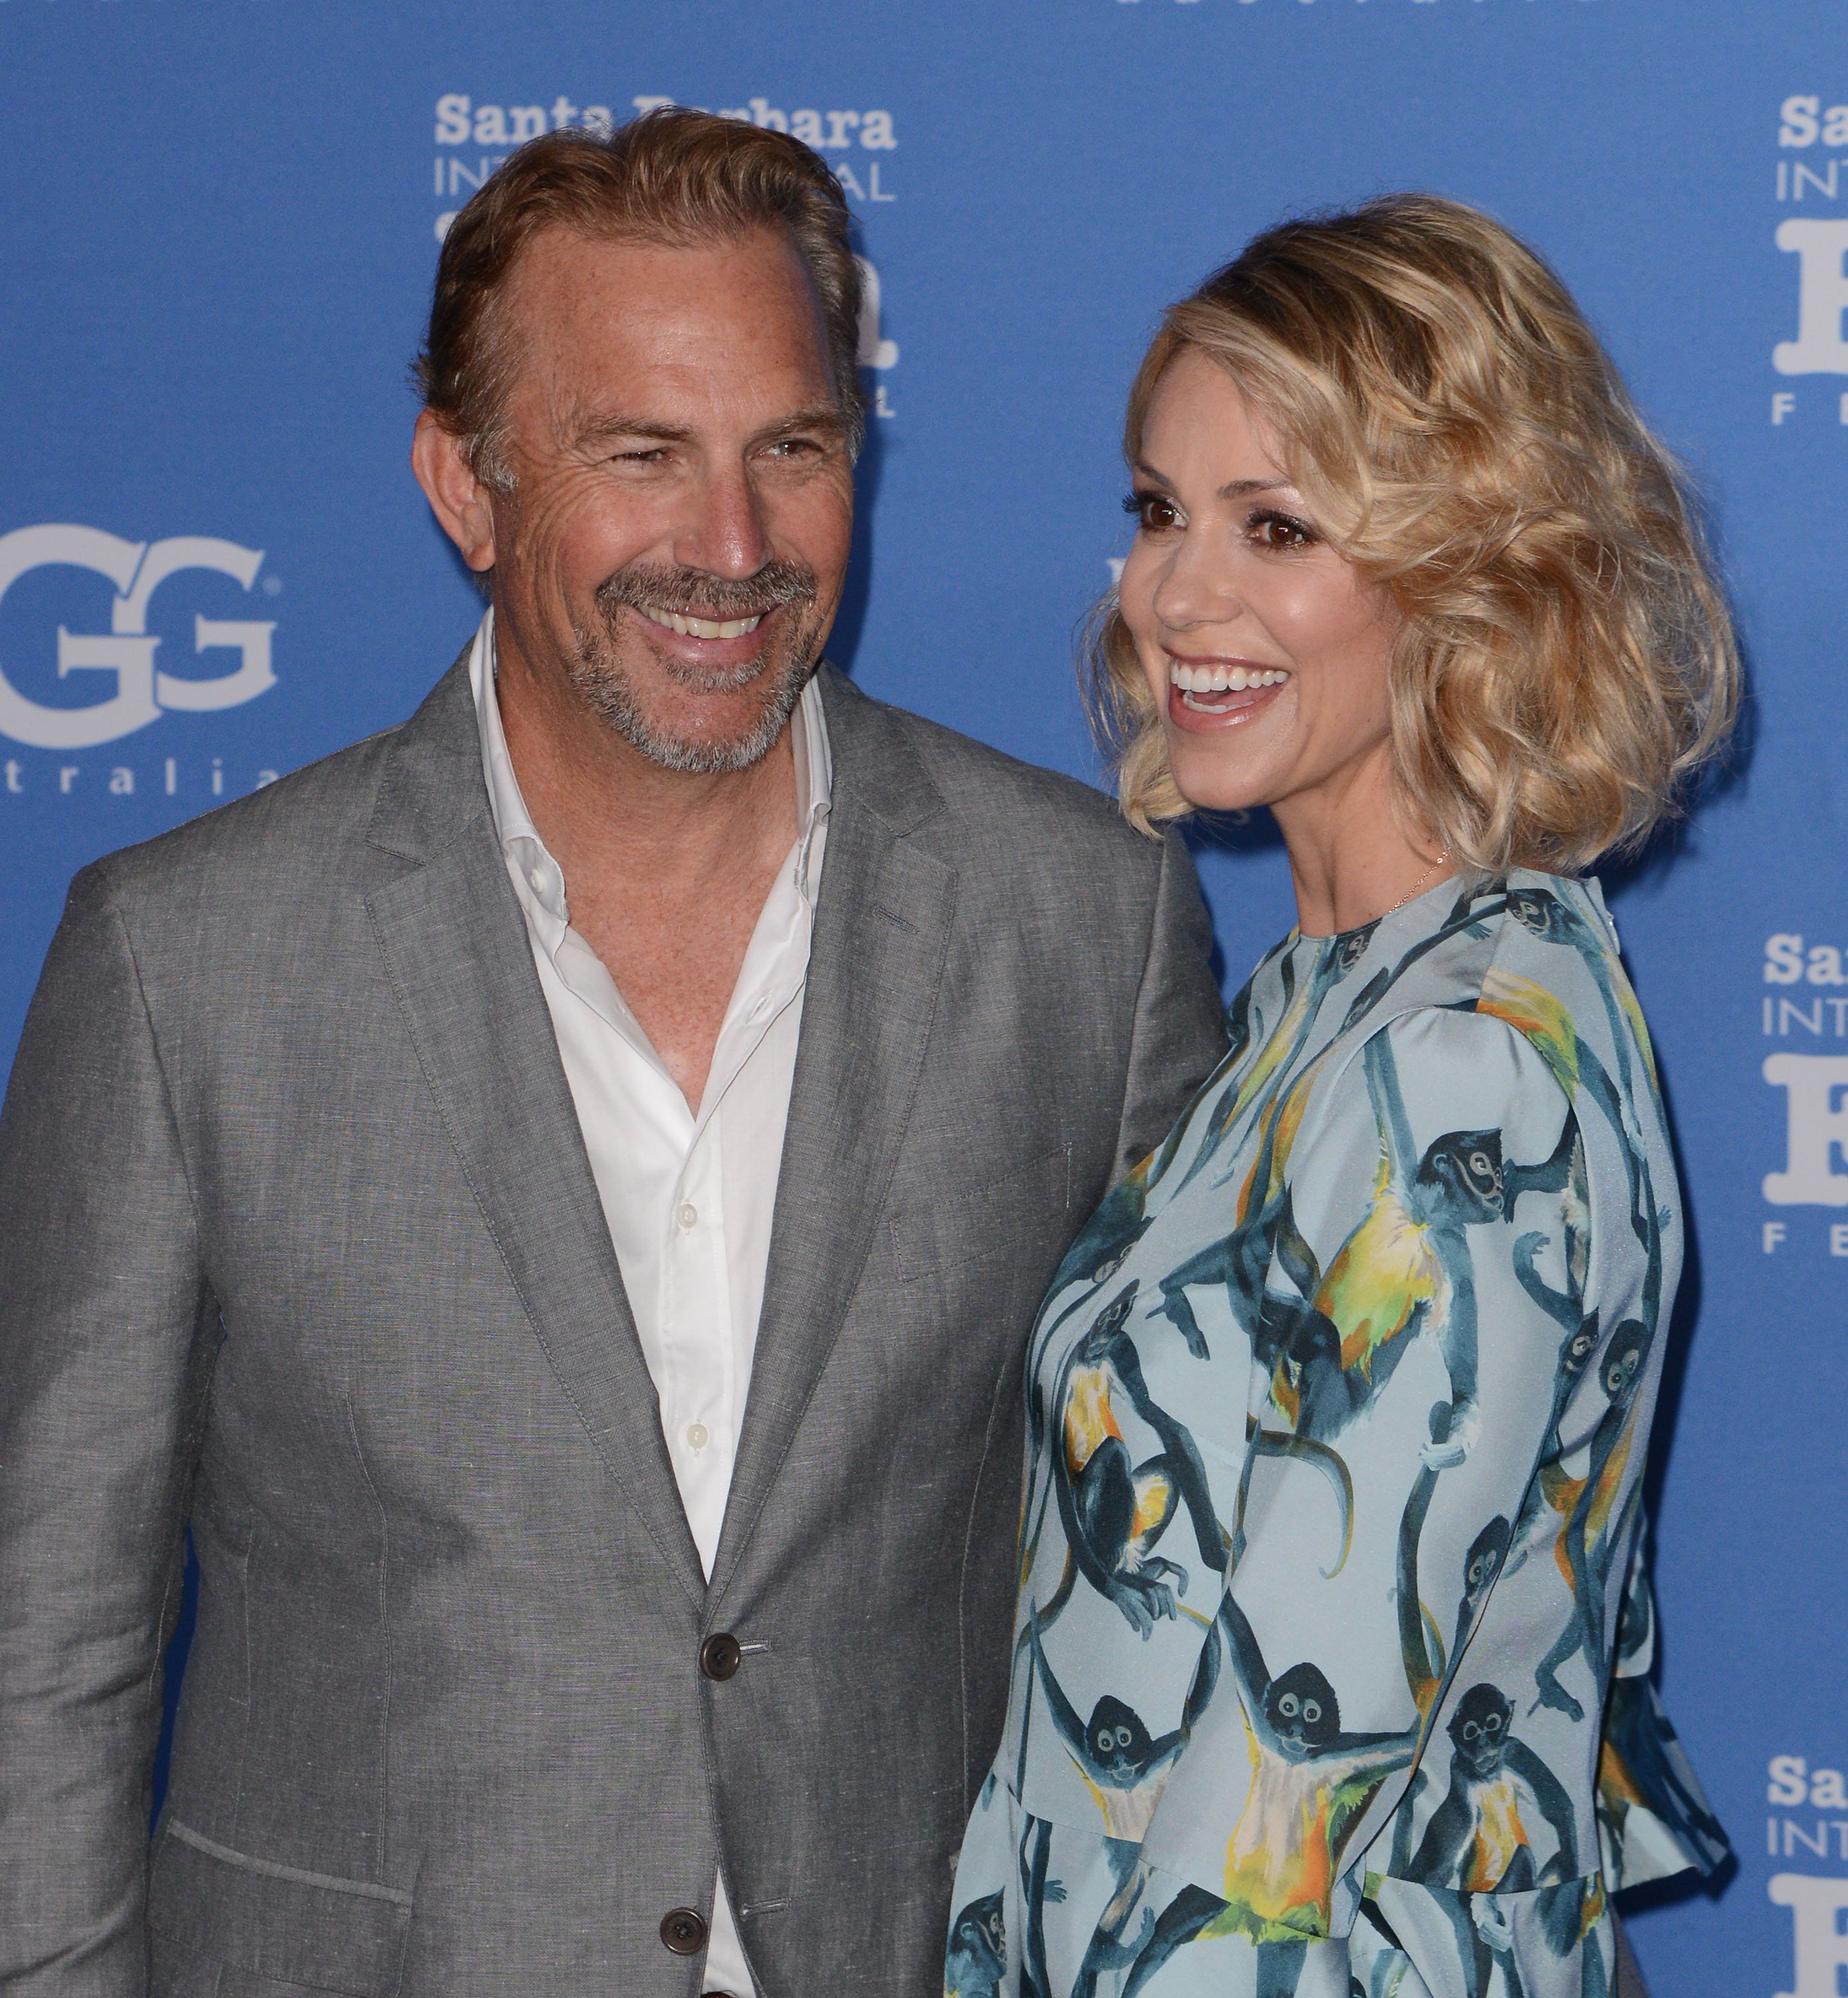 Kevin Costner and his wife Christine Baumgartner attend the World Premiere of "McFarland, USA" during Closing Night of the 30th Annual Santa Barbara International Film Festival at Arlington Theatre on February 7, 2015, in Santa Barbara, California. | Source: Getty Images